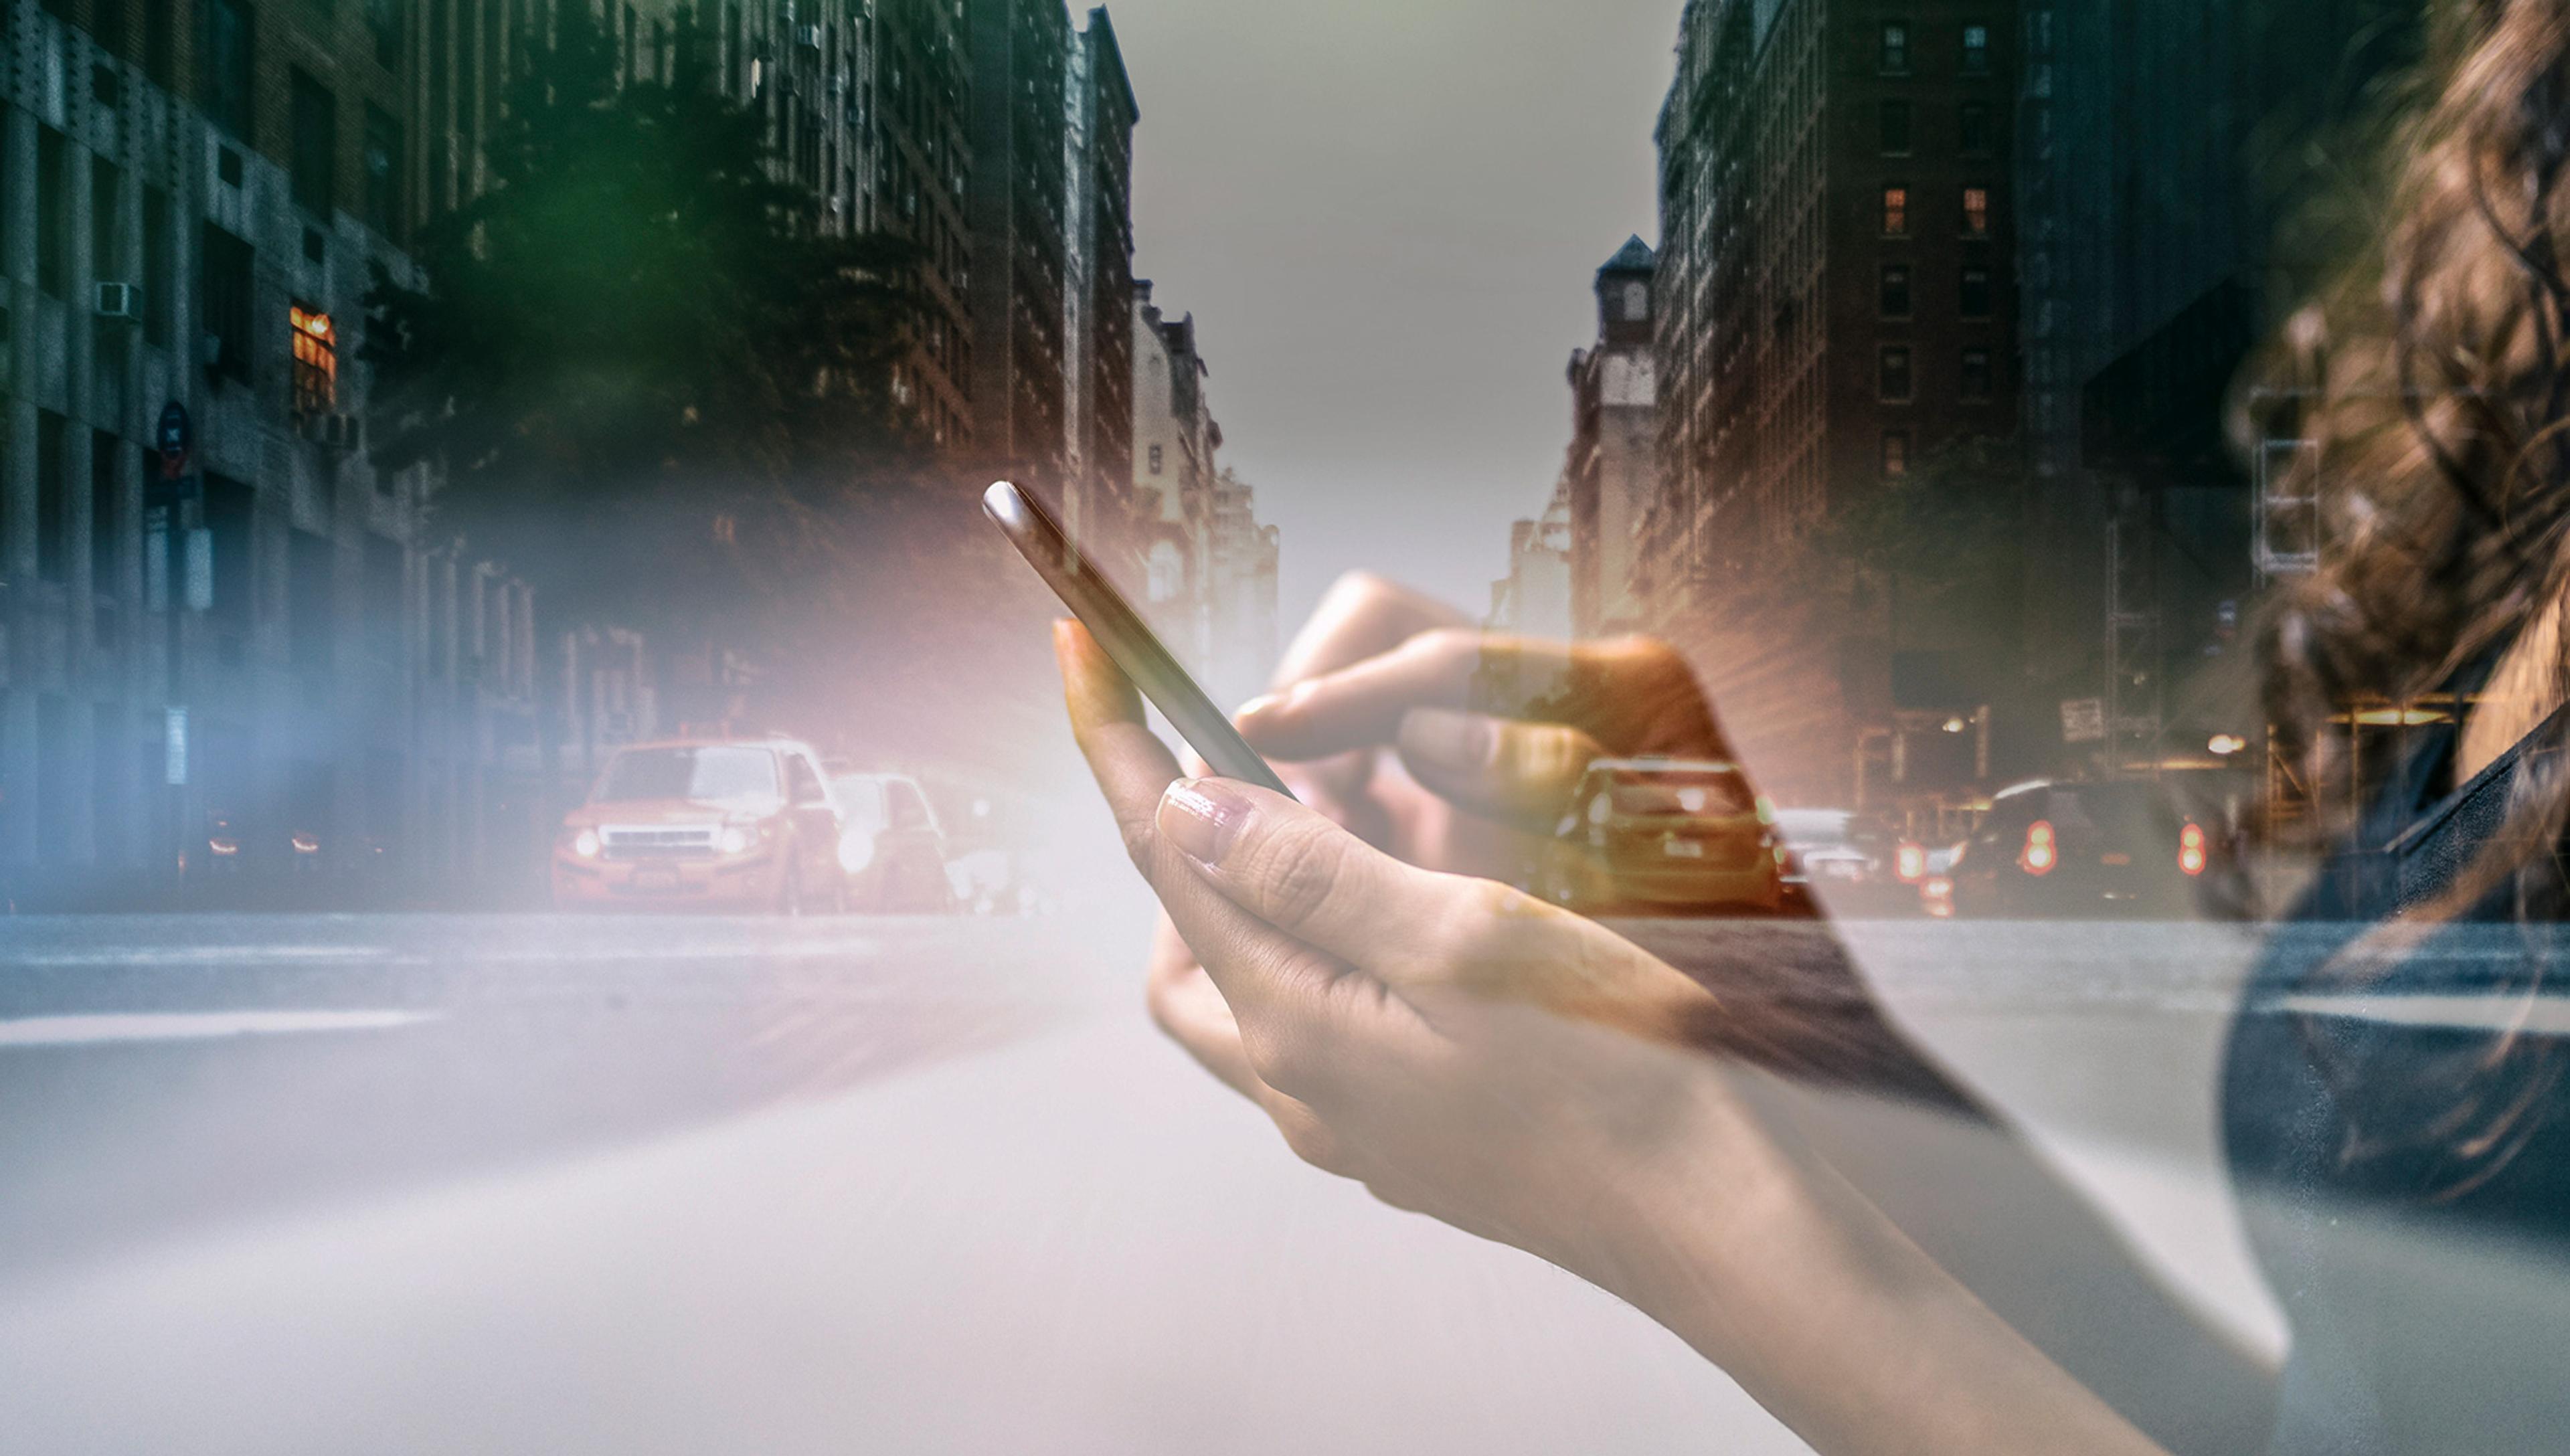 A double exposure image of a person using a smartphone overlaid with a bustling city street scene with cars and tall buildings.